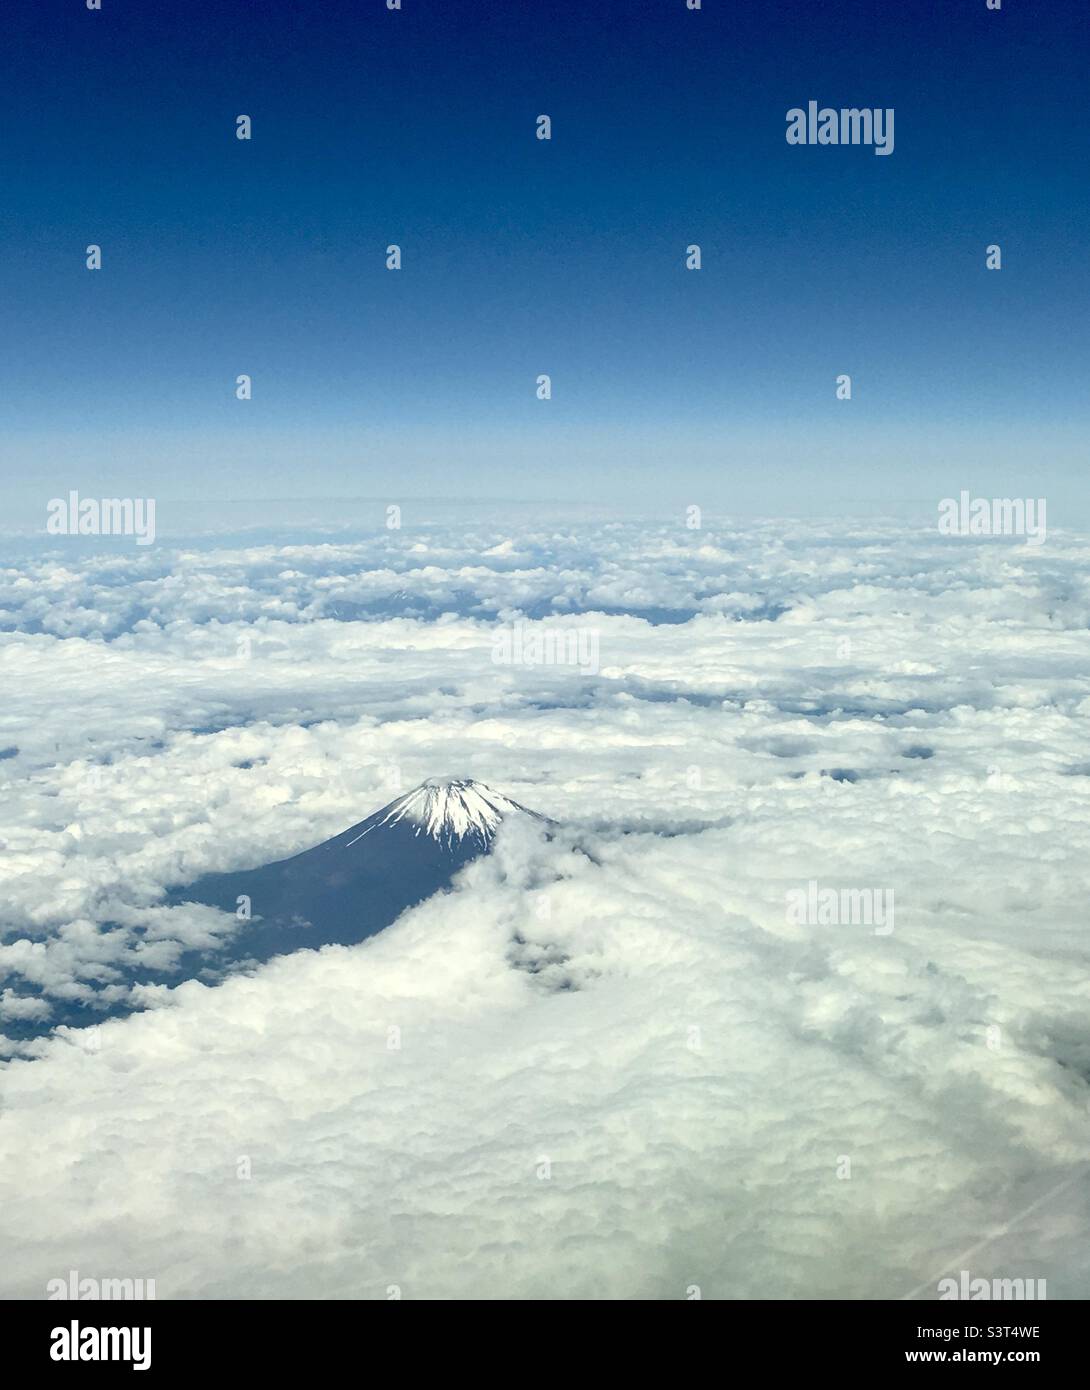 Aerial Image of Mount Fuji, partially covered in cloud Stock Photo - Alamy